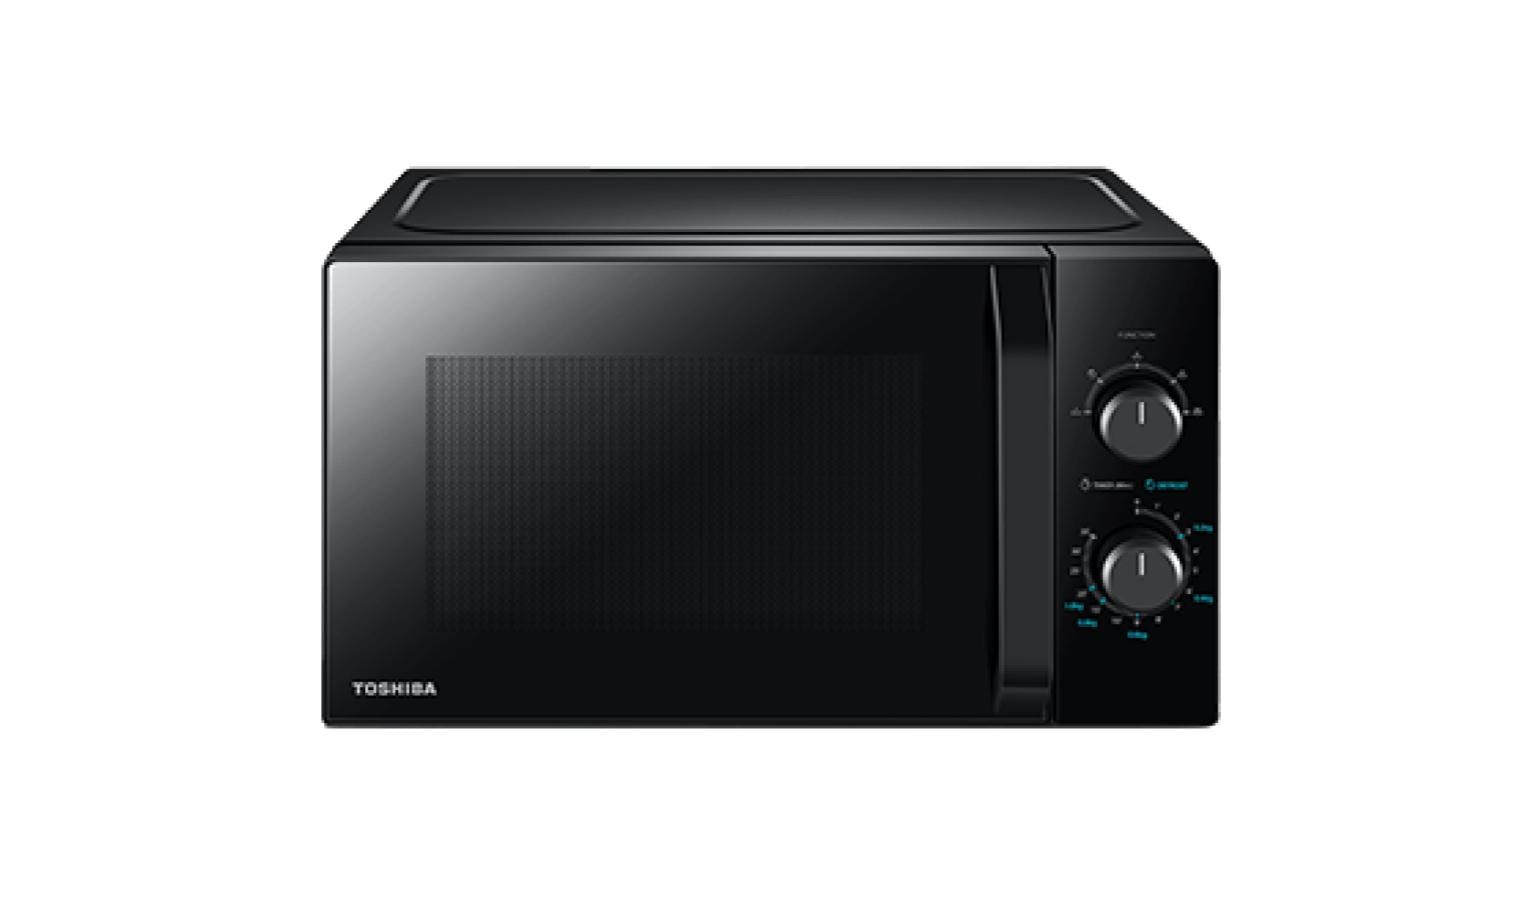 https://hnsgsfp.imgix.net/9/images/detailed/83/toshiba-21l-microwave-oven-black-mm21pf_1.jpg?fit=fill&bg=0FFF&w=1534&h=900&auto=format,compress